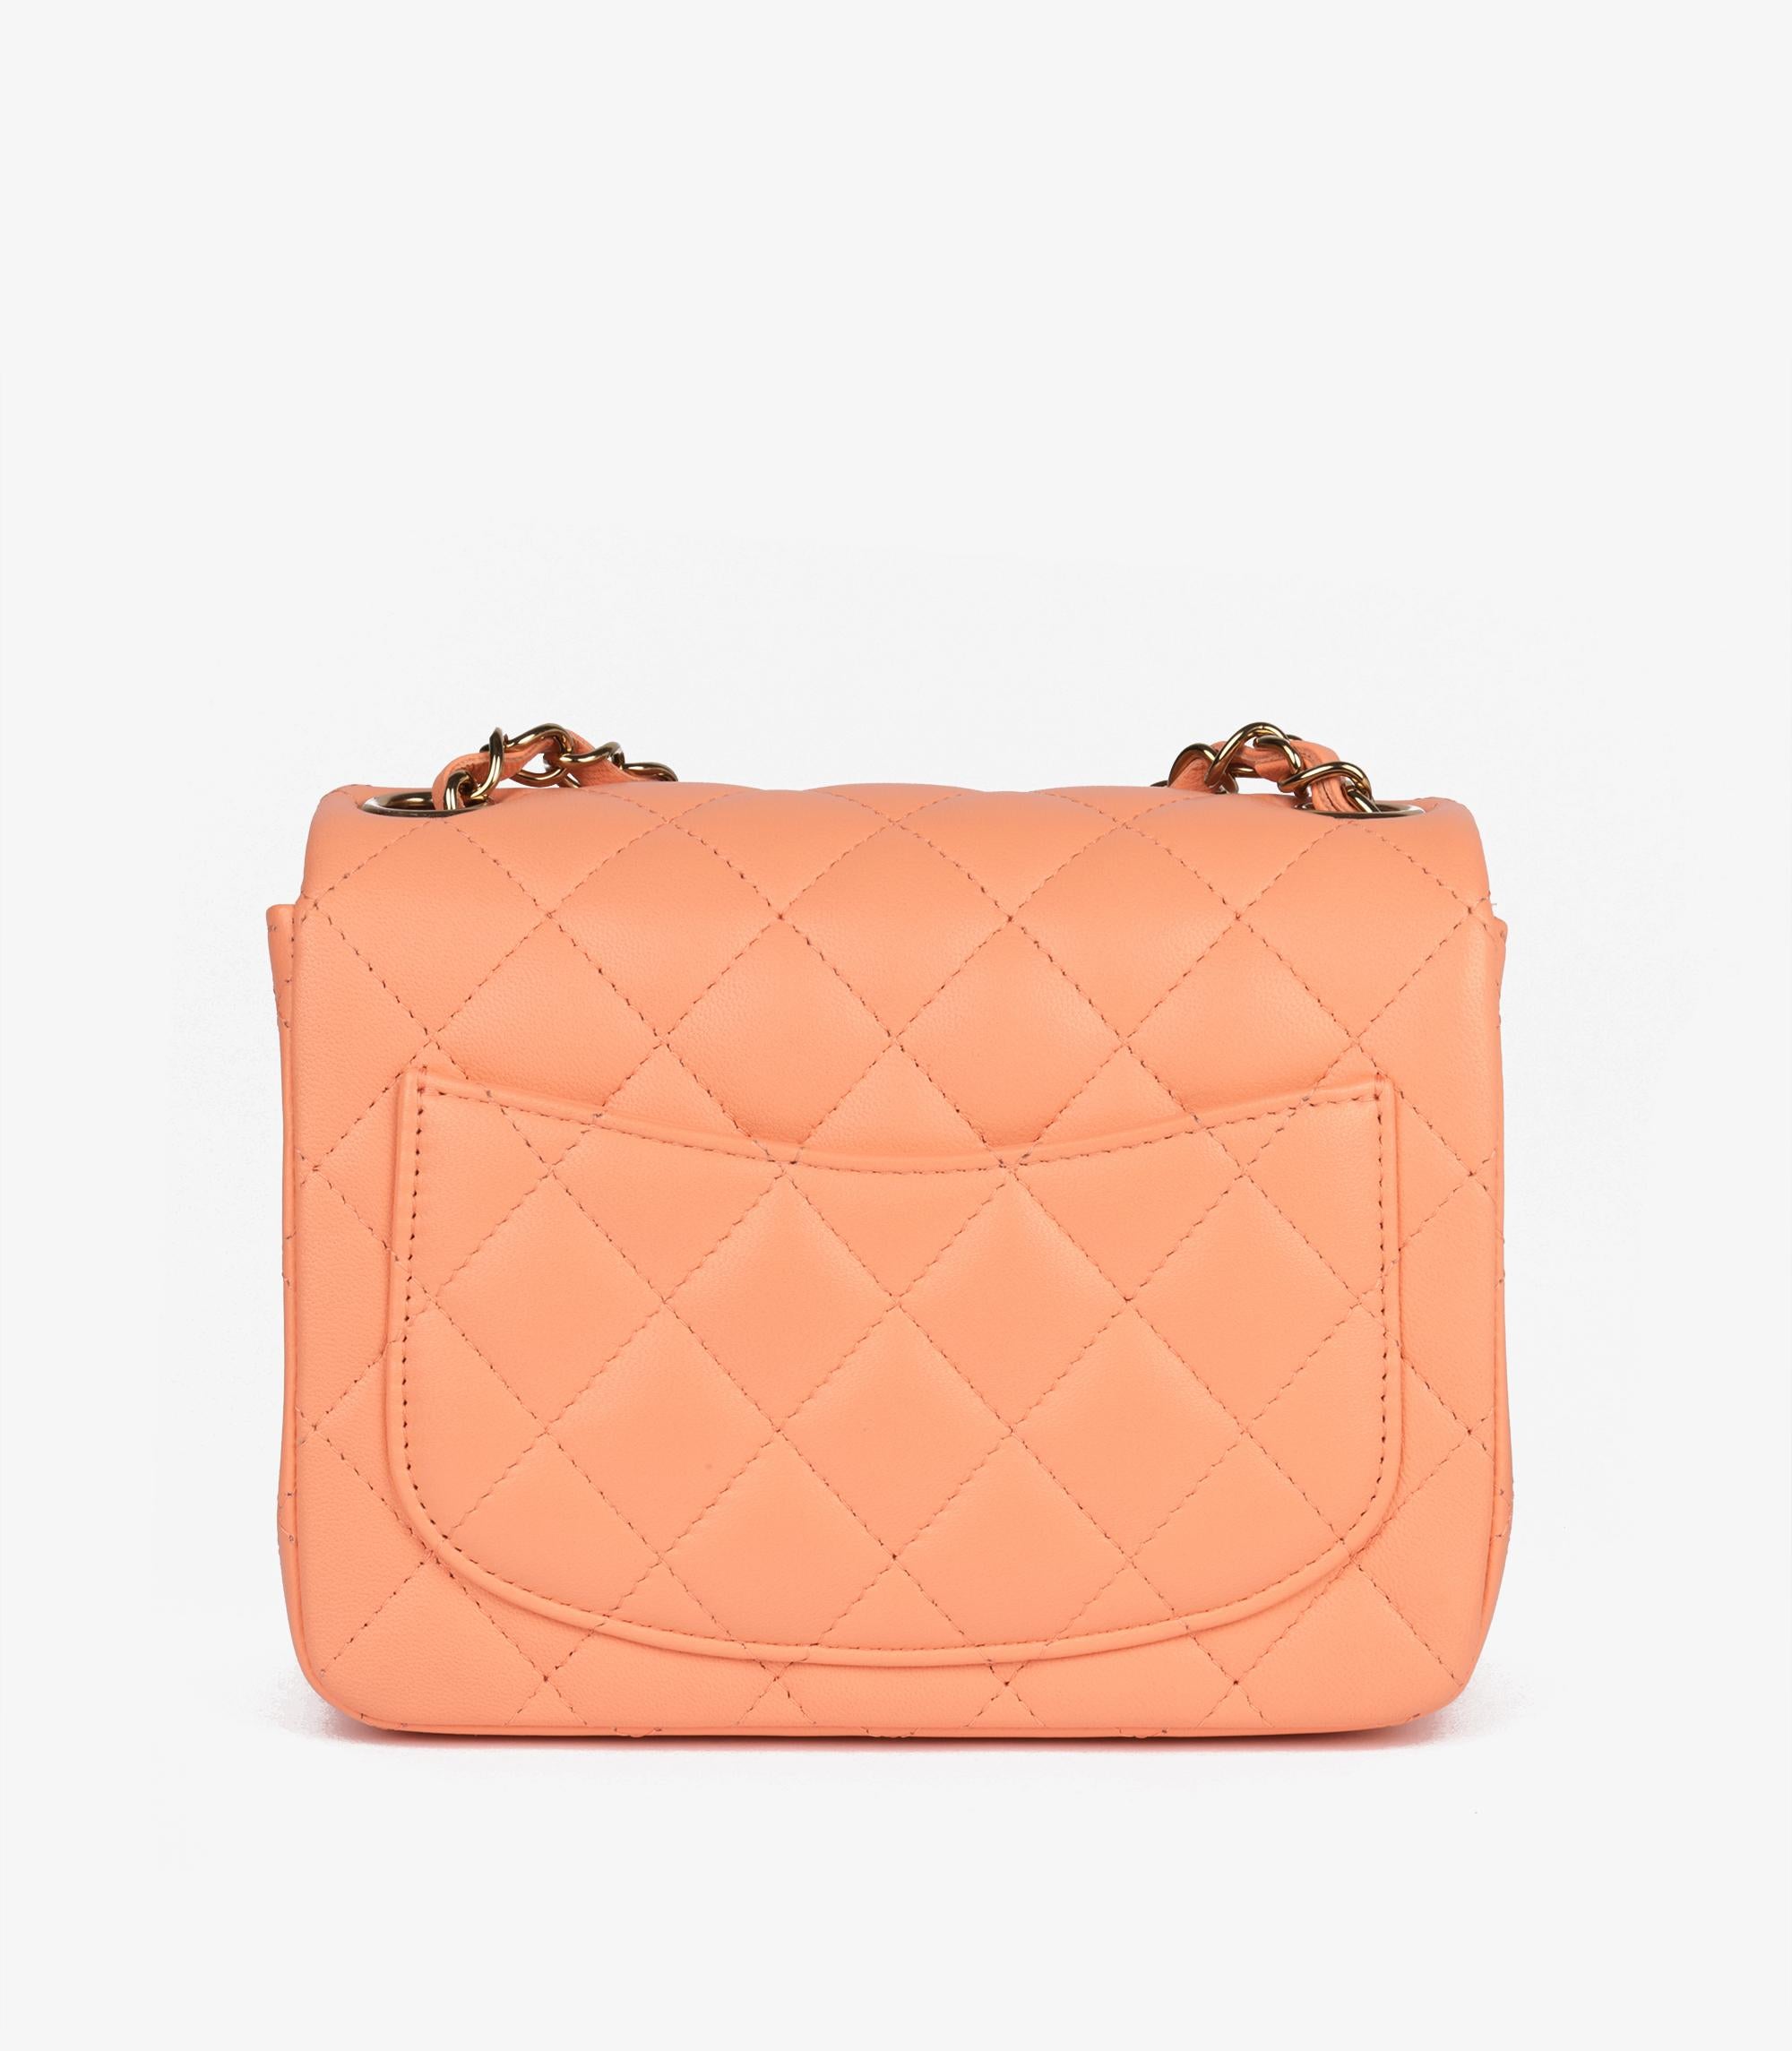 Chanel Salmon Peach Quilted Lambskin Square Mini Flap Bag For Sale 1